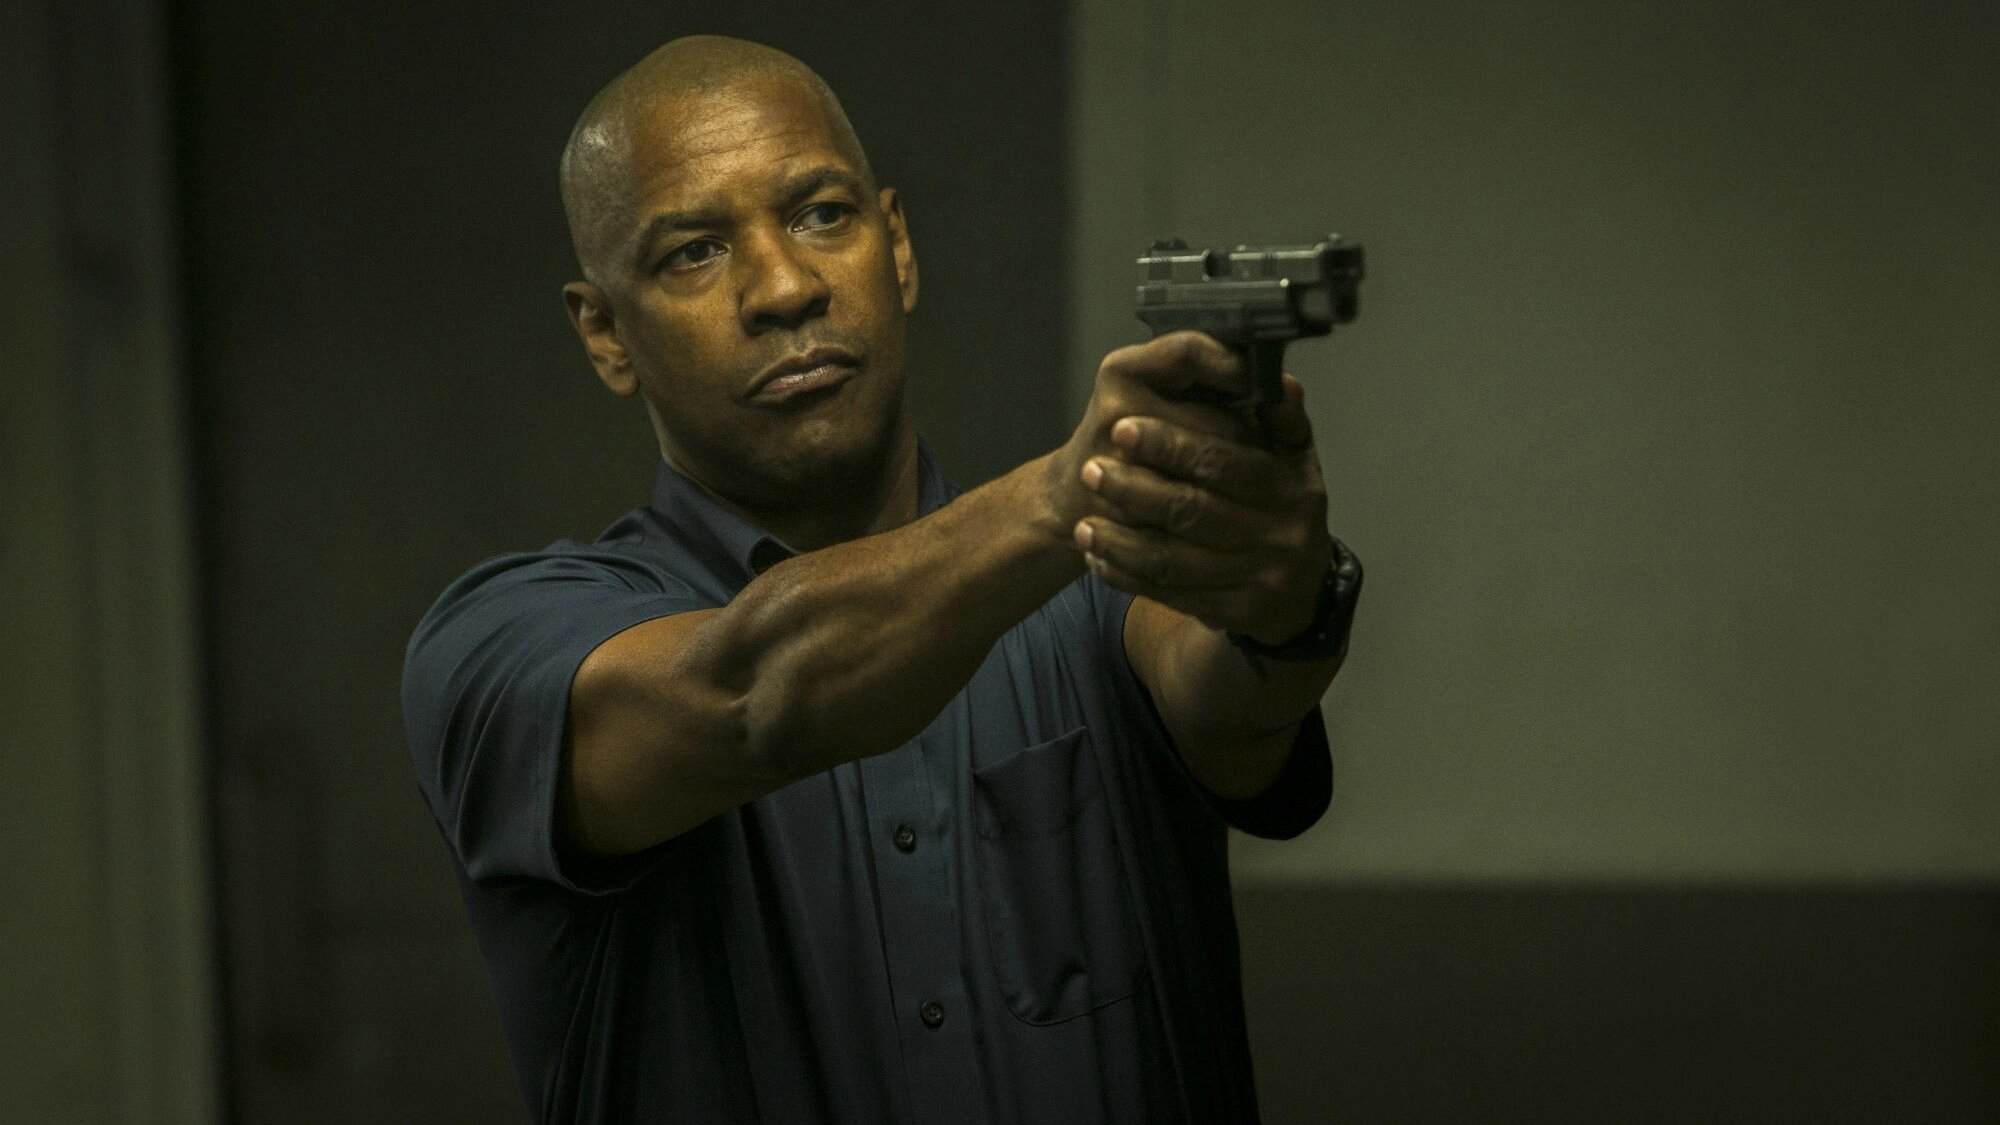 movies like the equalizer